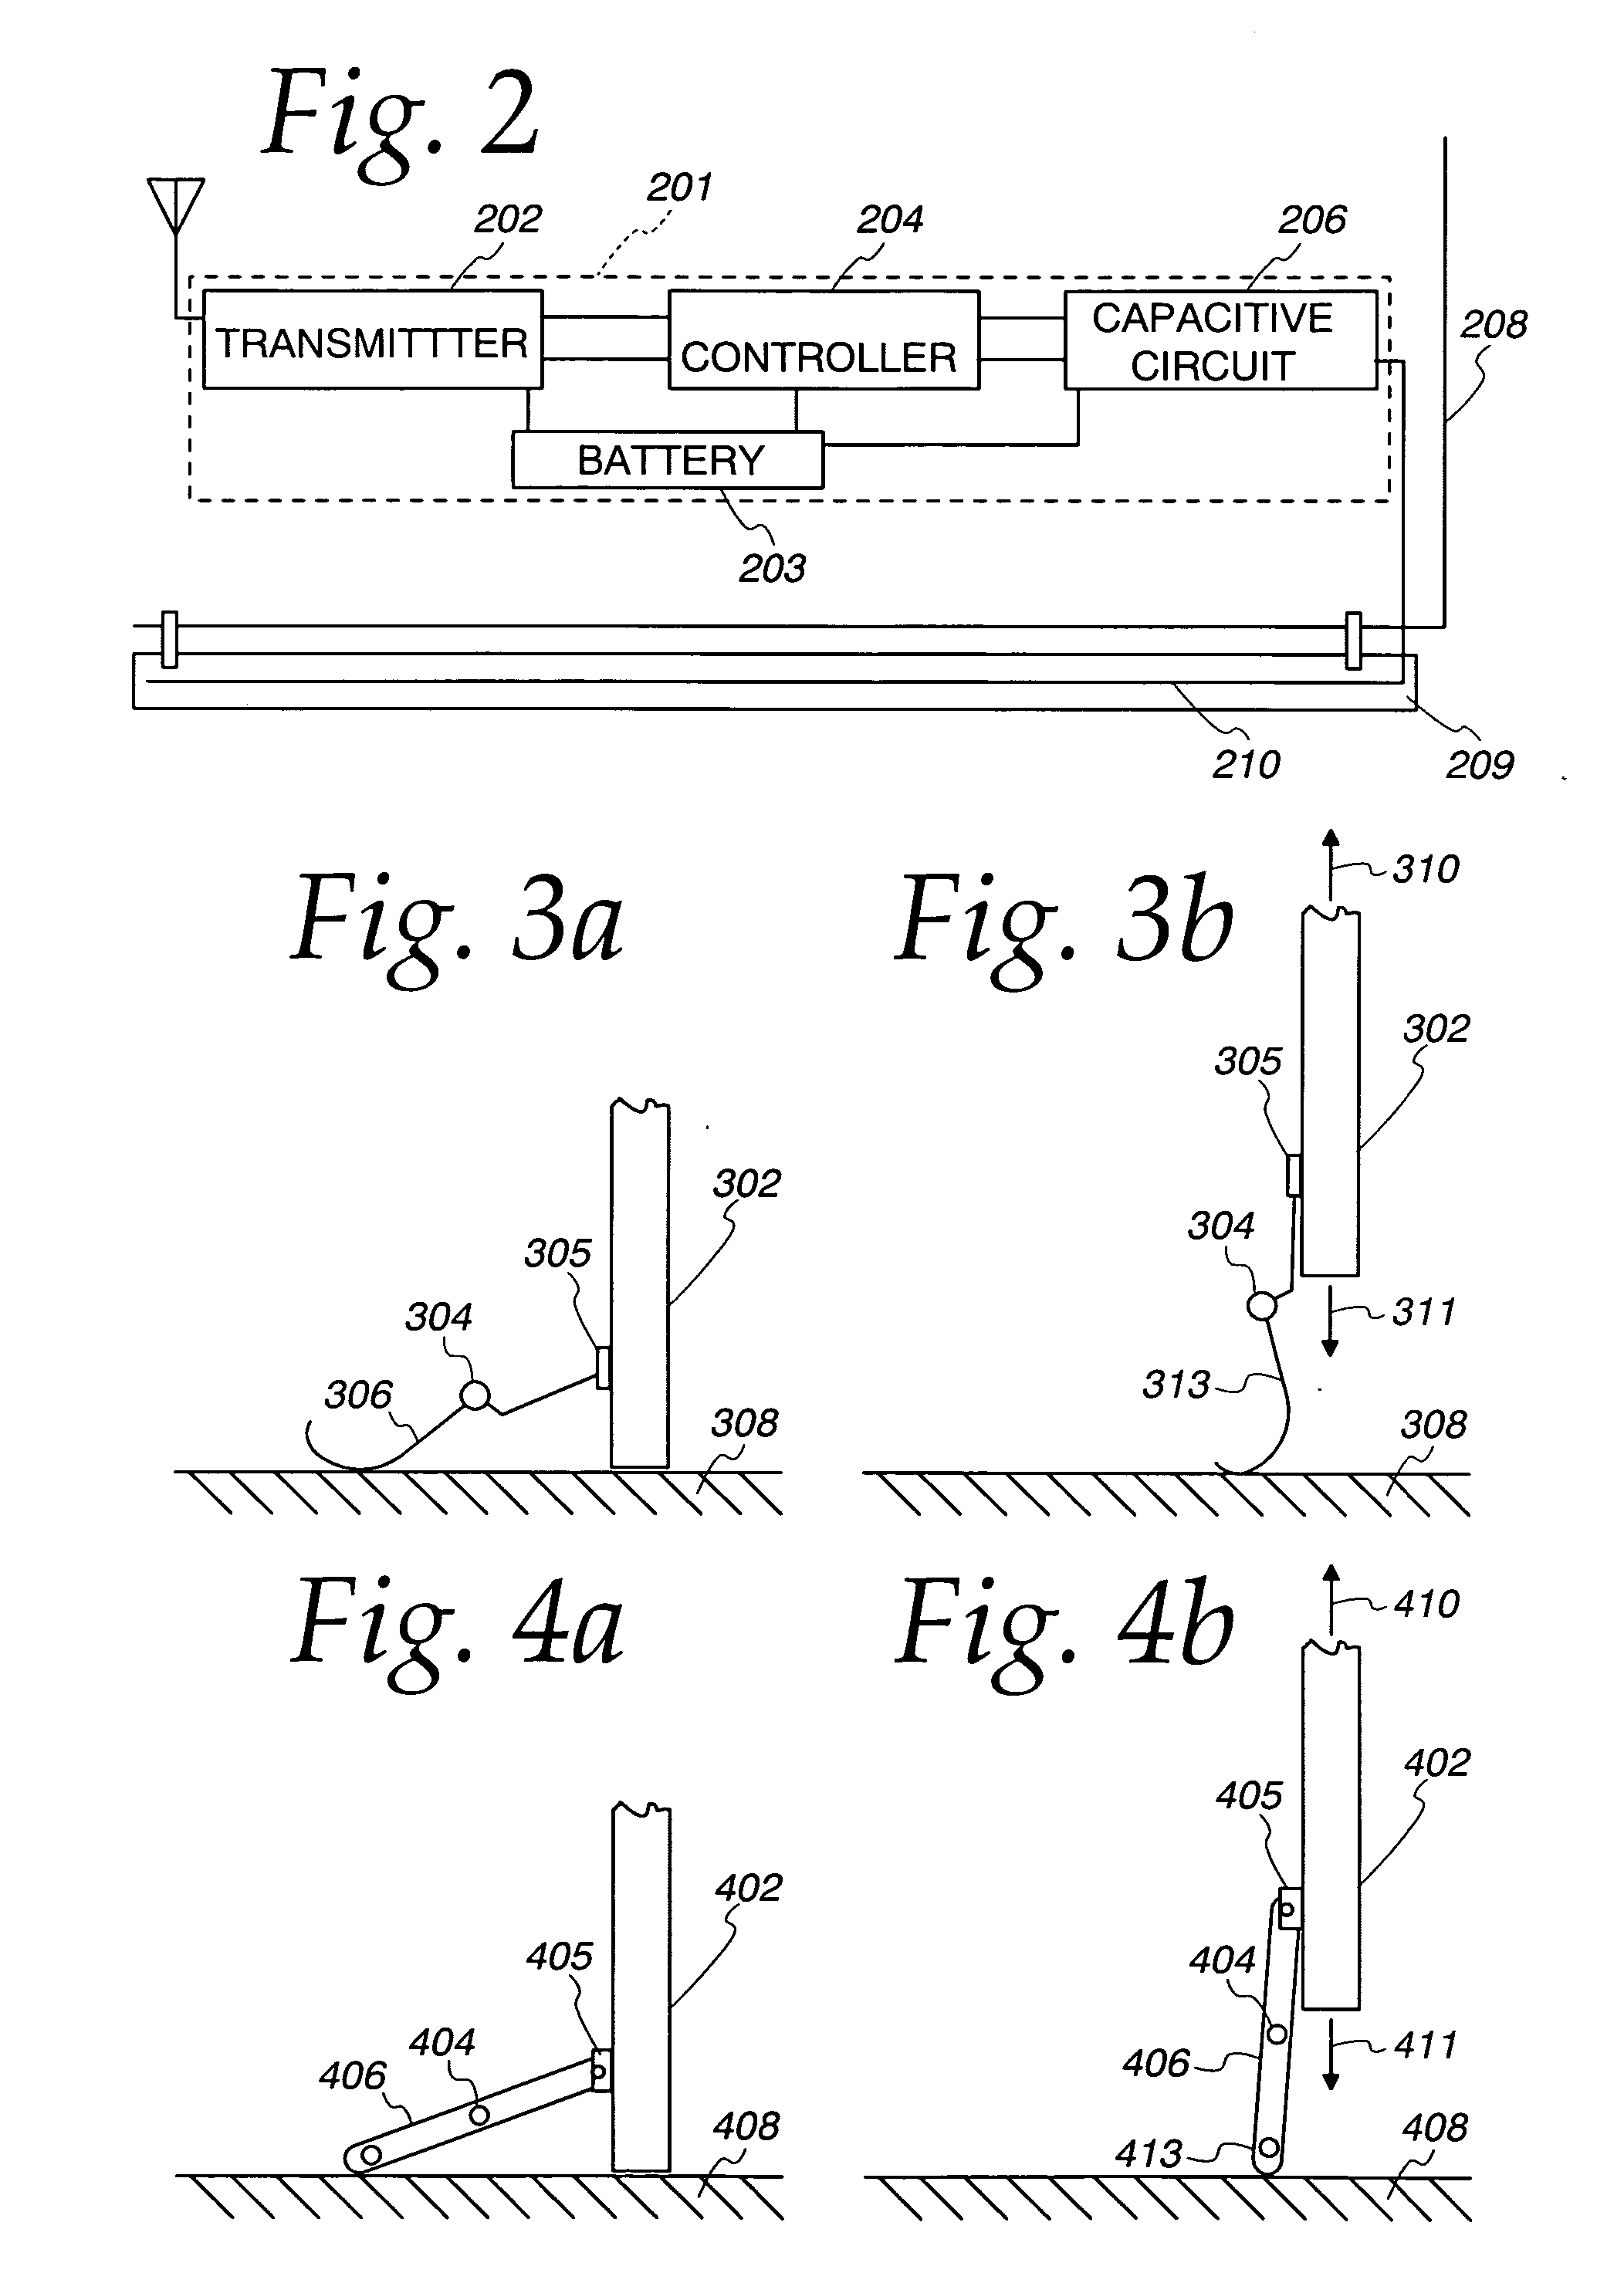 System and method for using a capacitive door edge sensor